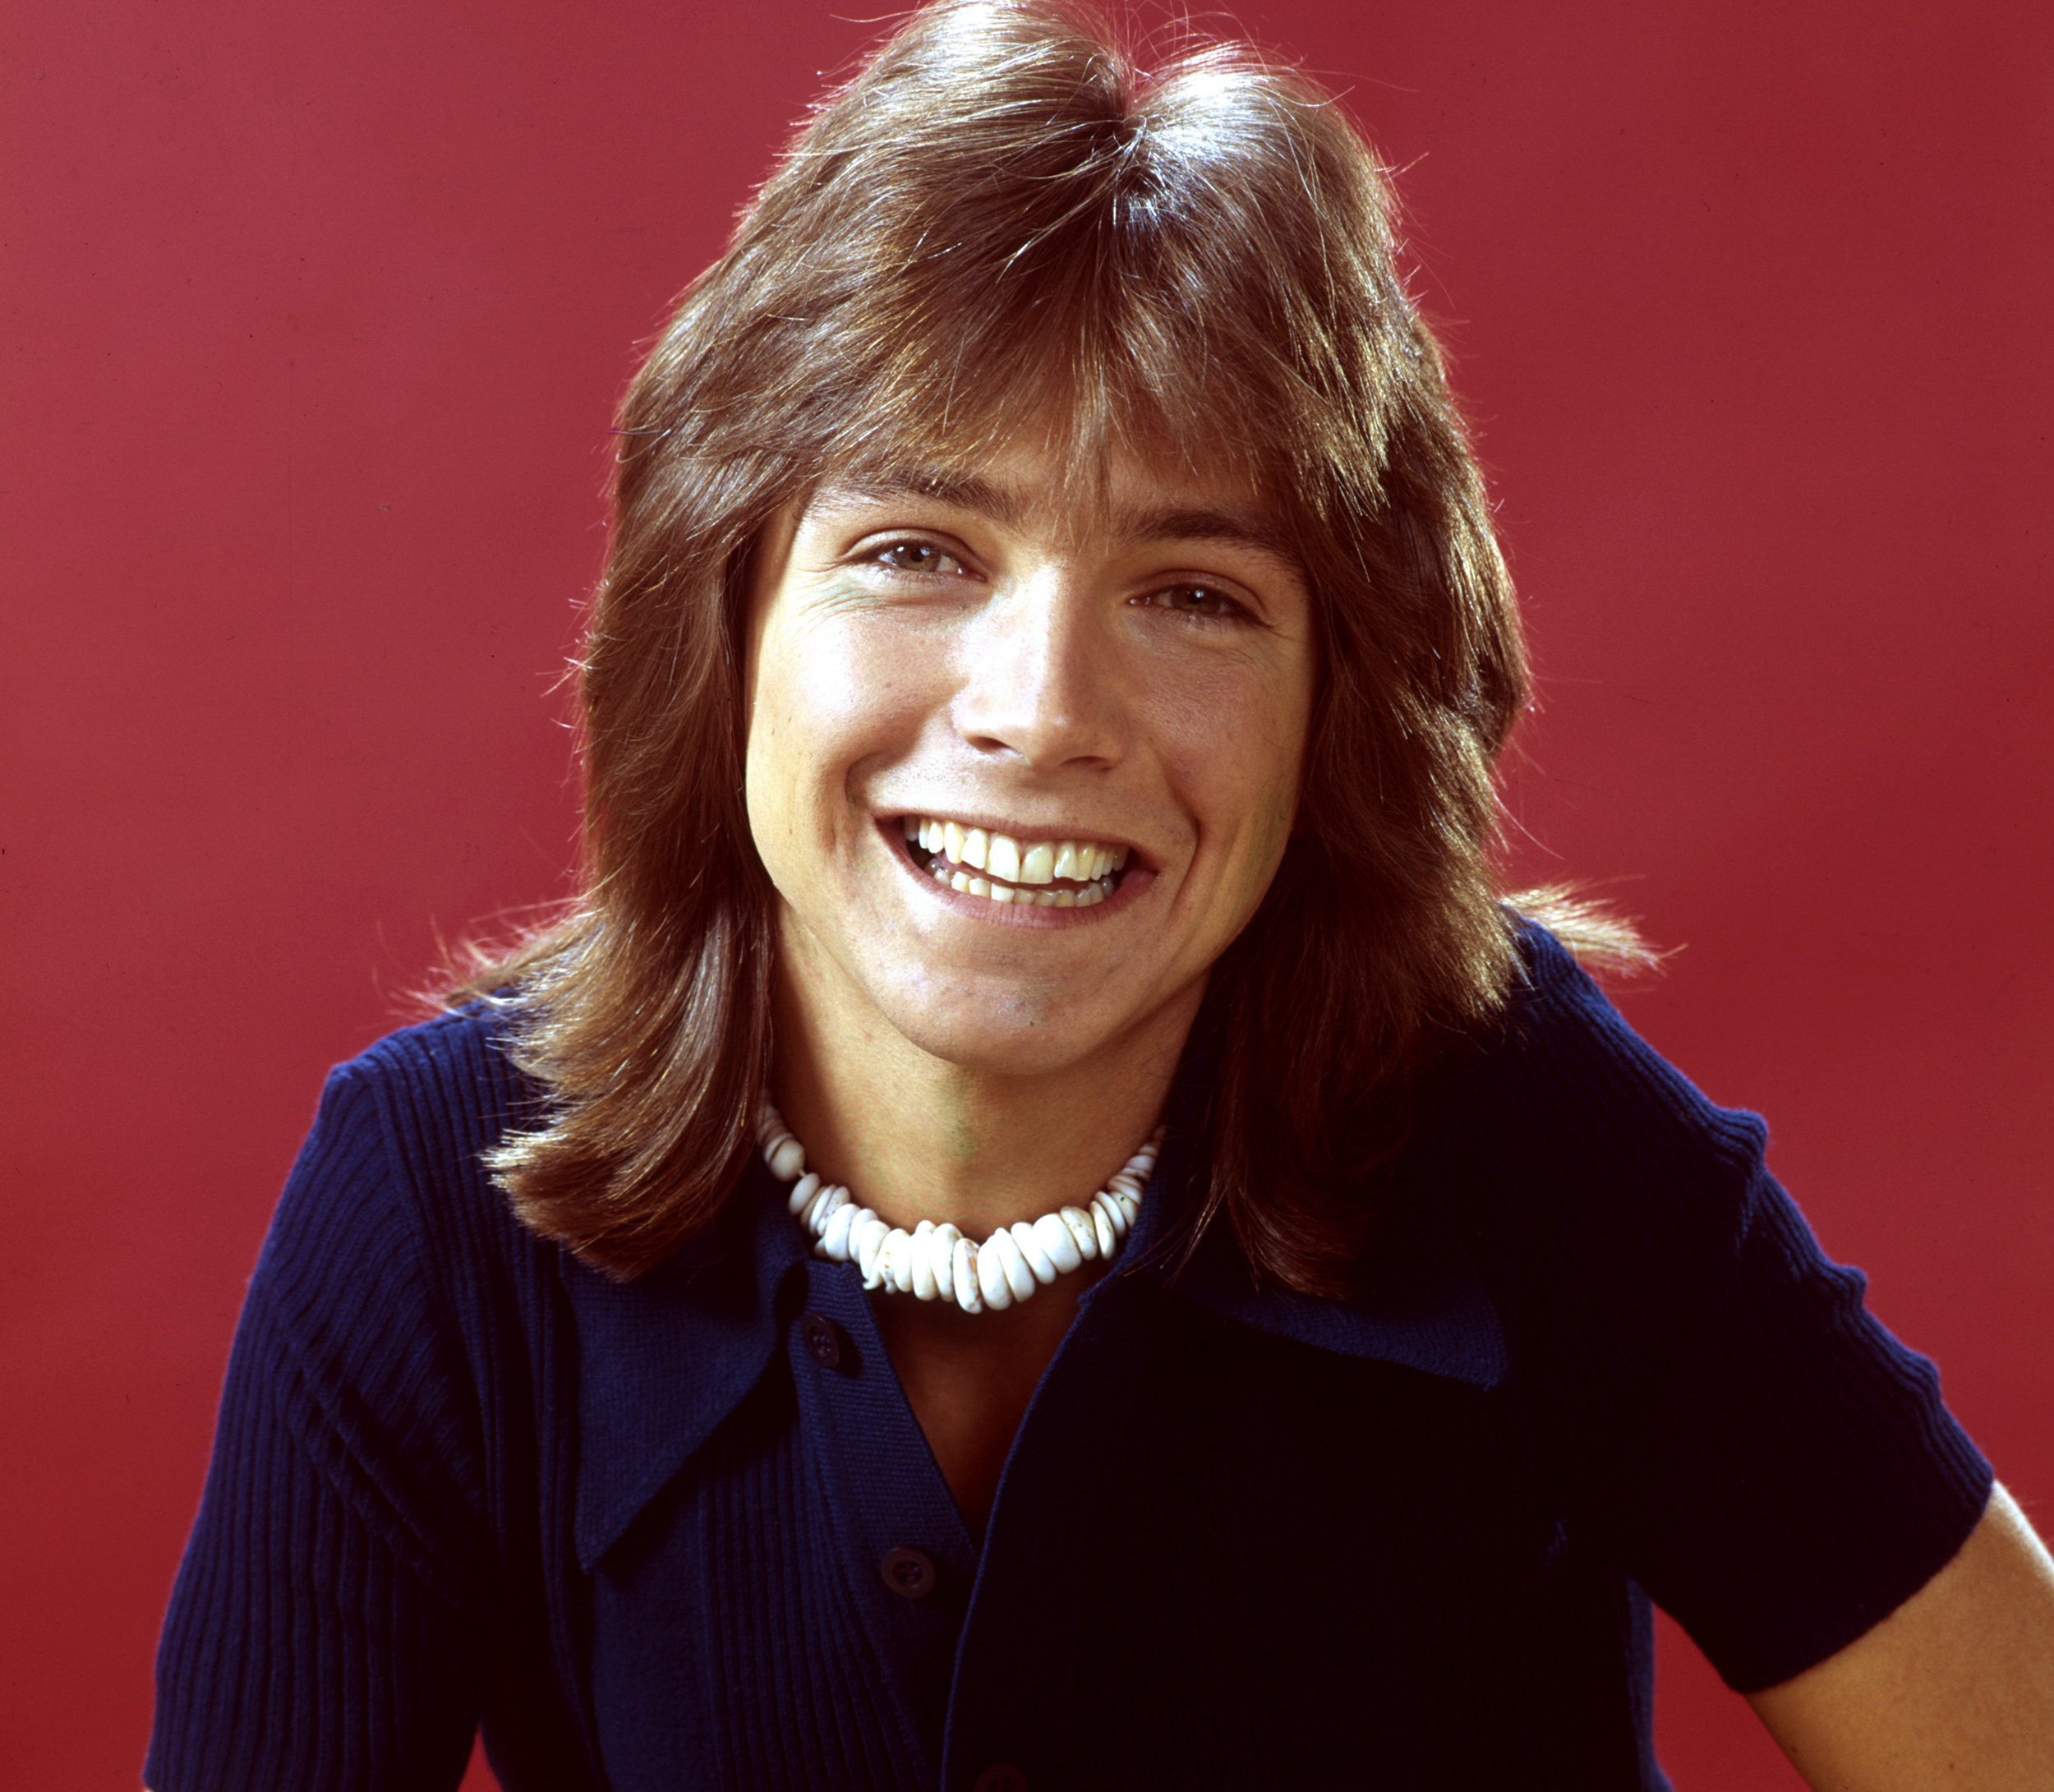 David Cassidy Passed Away At 67 Final Days Violation of Doctor’s Orders!